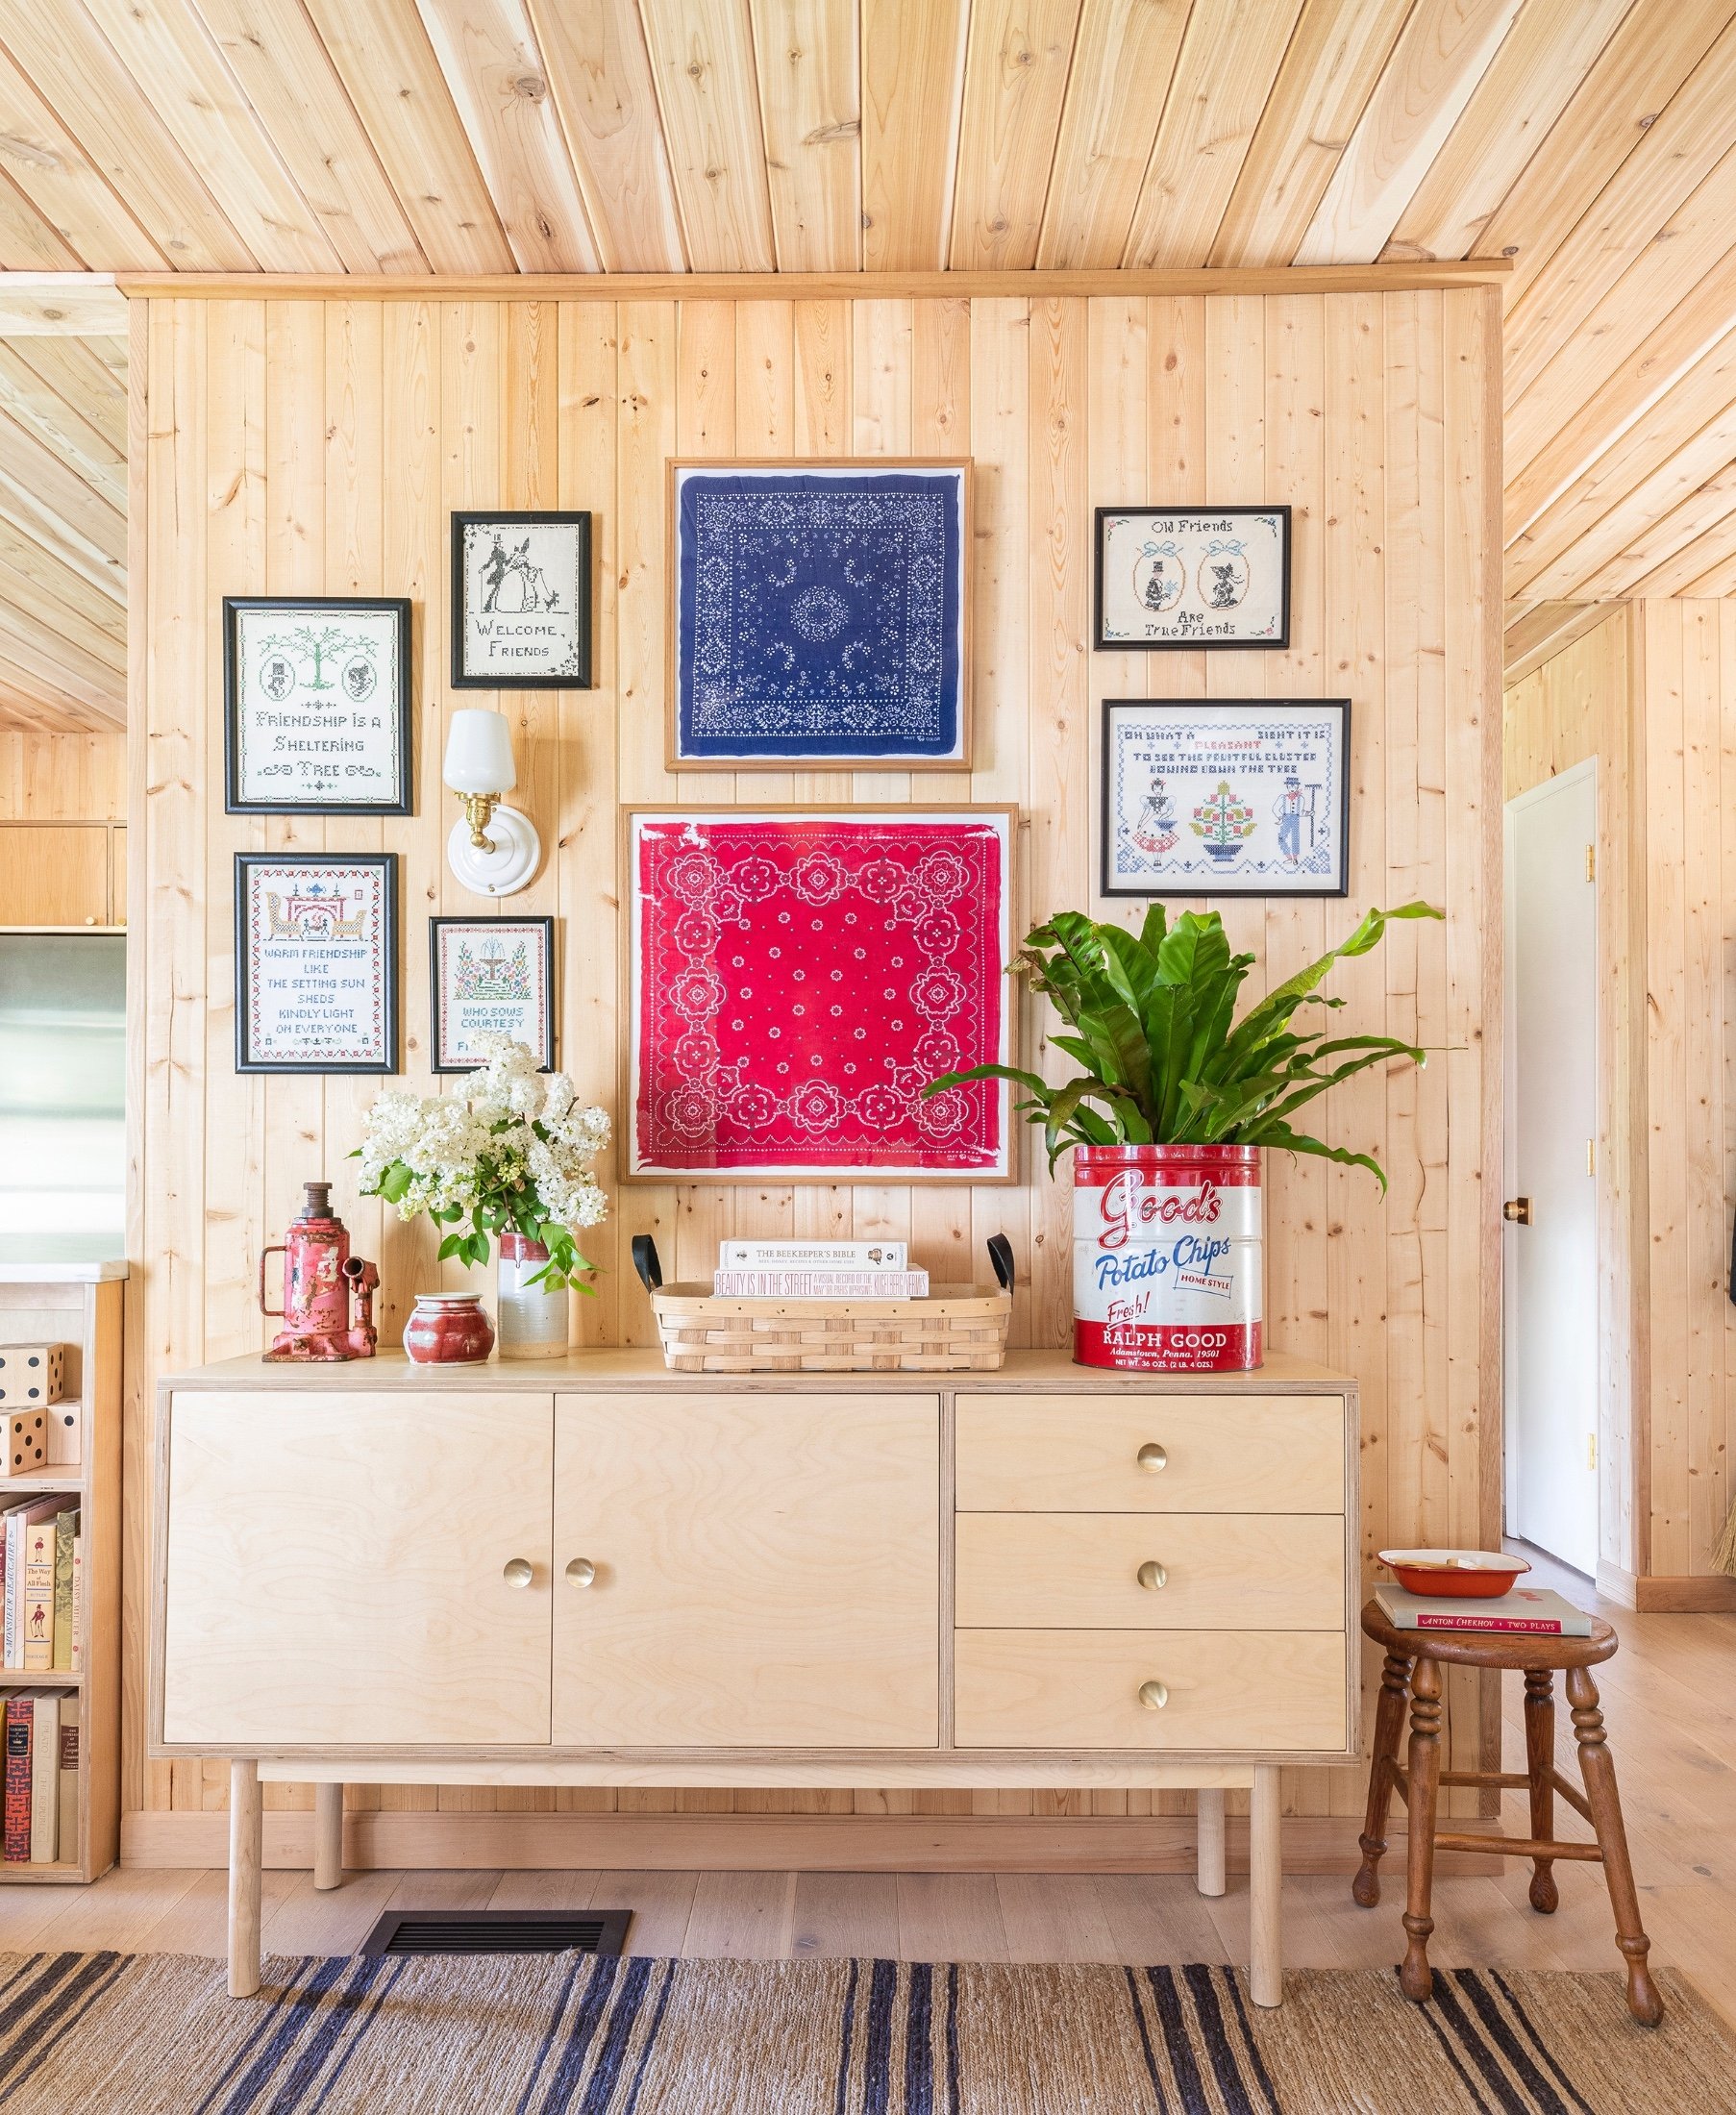 Portland Oregon-based interior designer Max Humphrey has been collecting bandanas and other vintage items for years, incorporating them into his own home and client projects. (Christopher Dibble via AP)